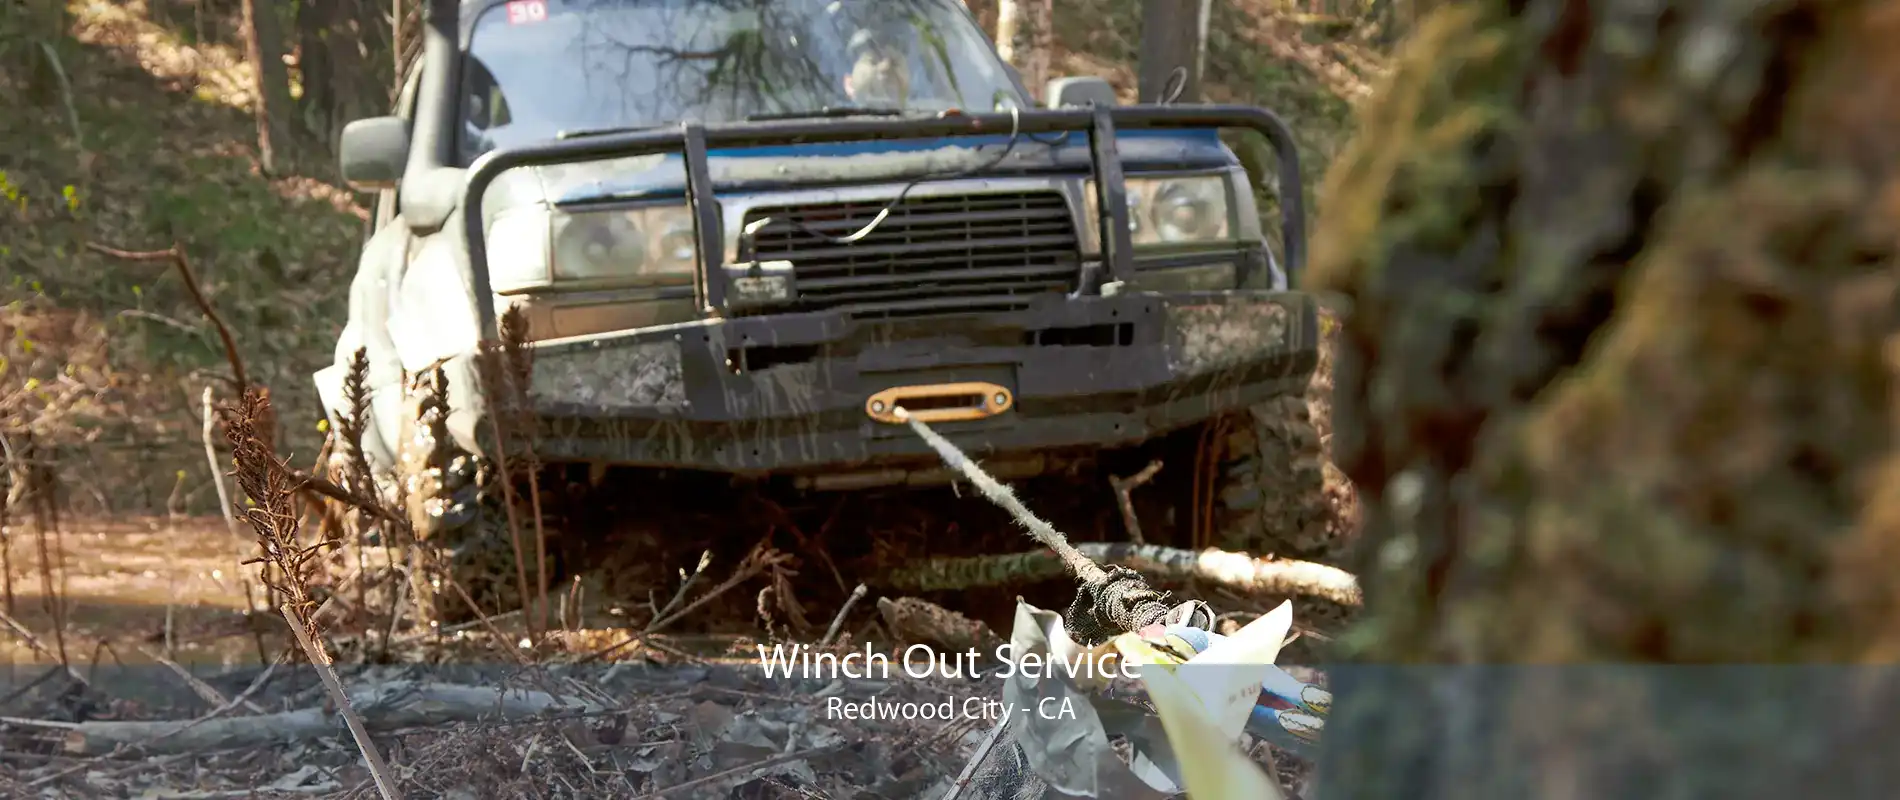 Winch Out Service Redwood City - CA